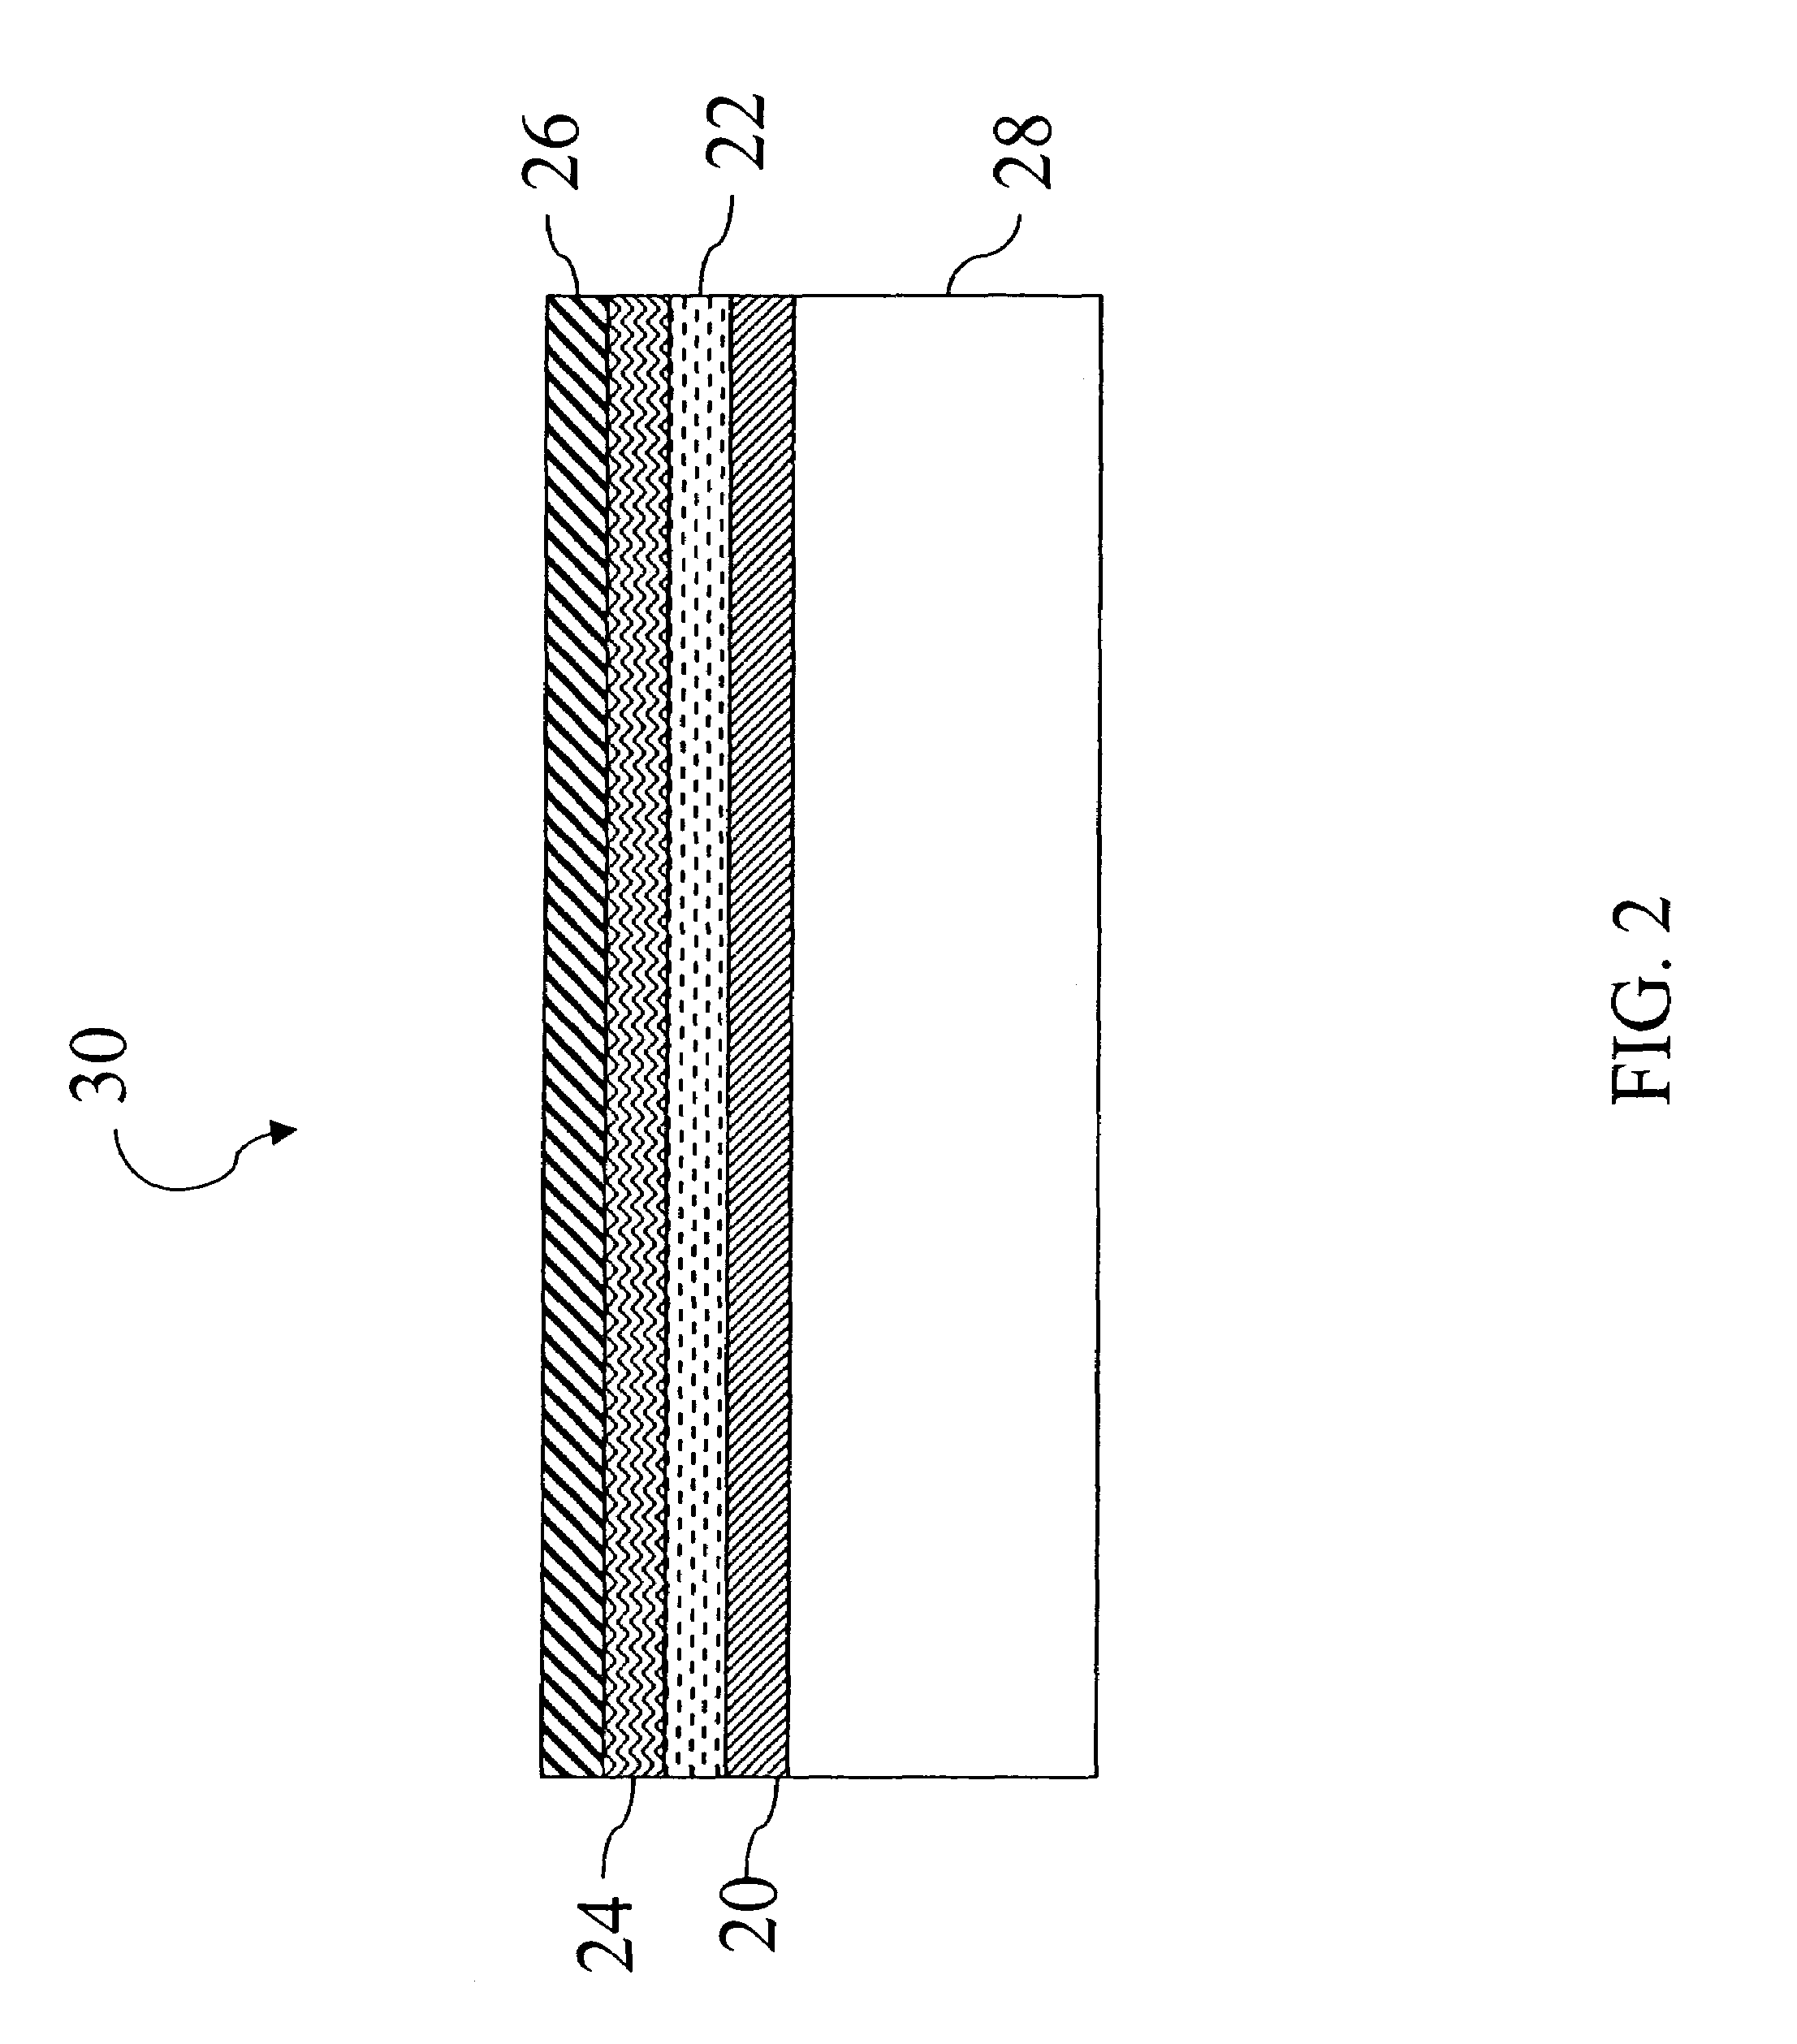 Polymeric conductor donor and transfer method